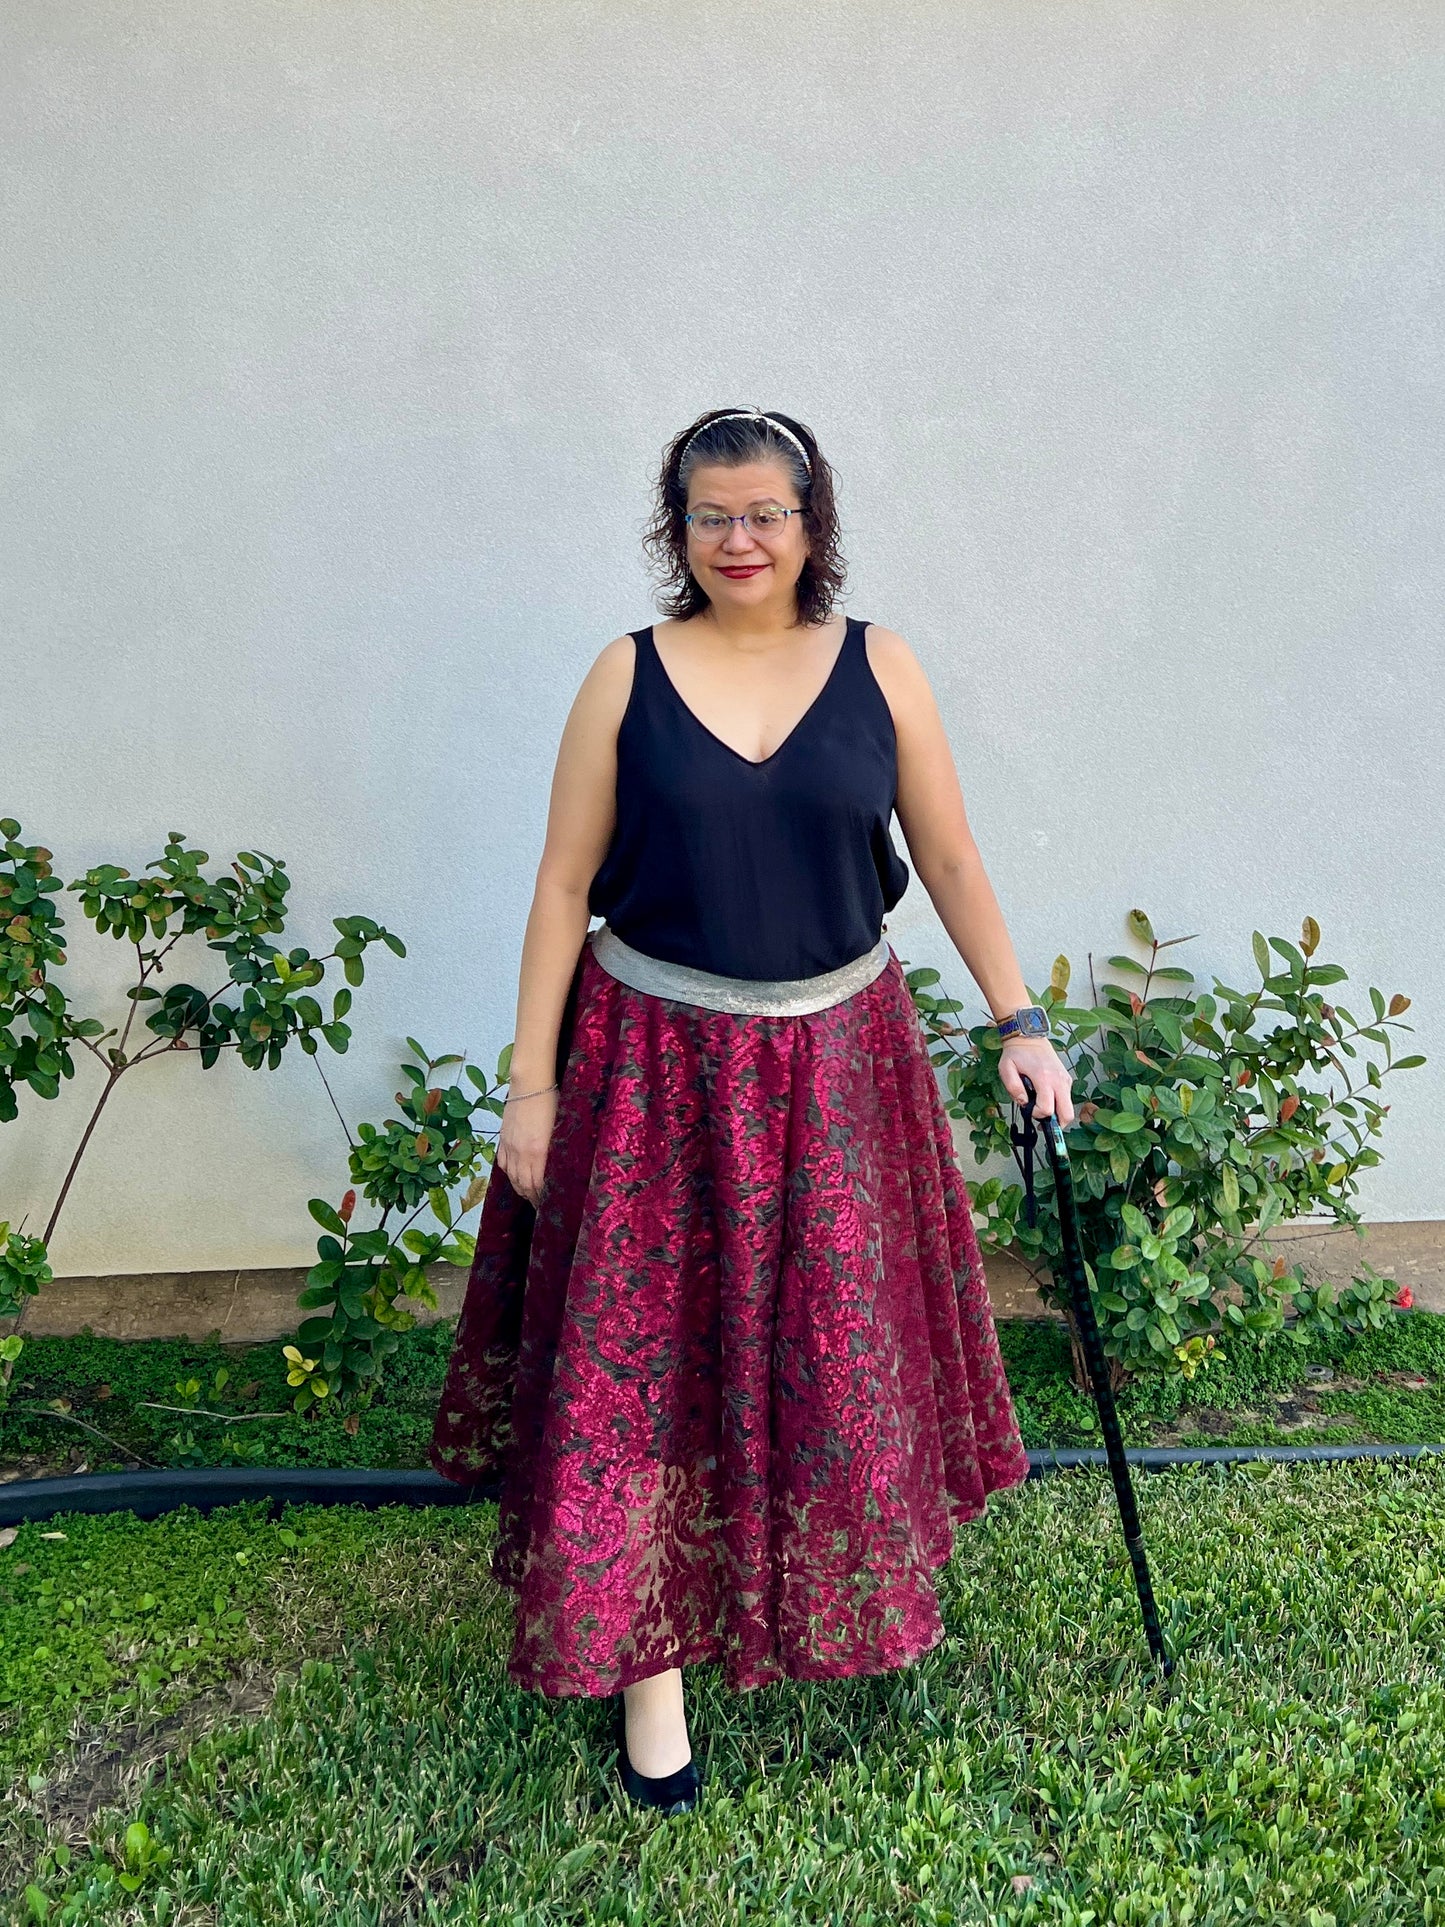 Woman standing with a cane next to a small garden wearing the enchanted overlay skirt with a dark red lace overlay and a black tank top.